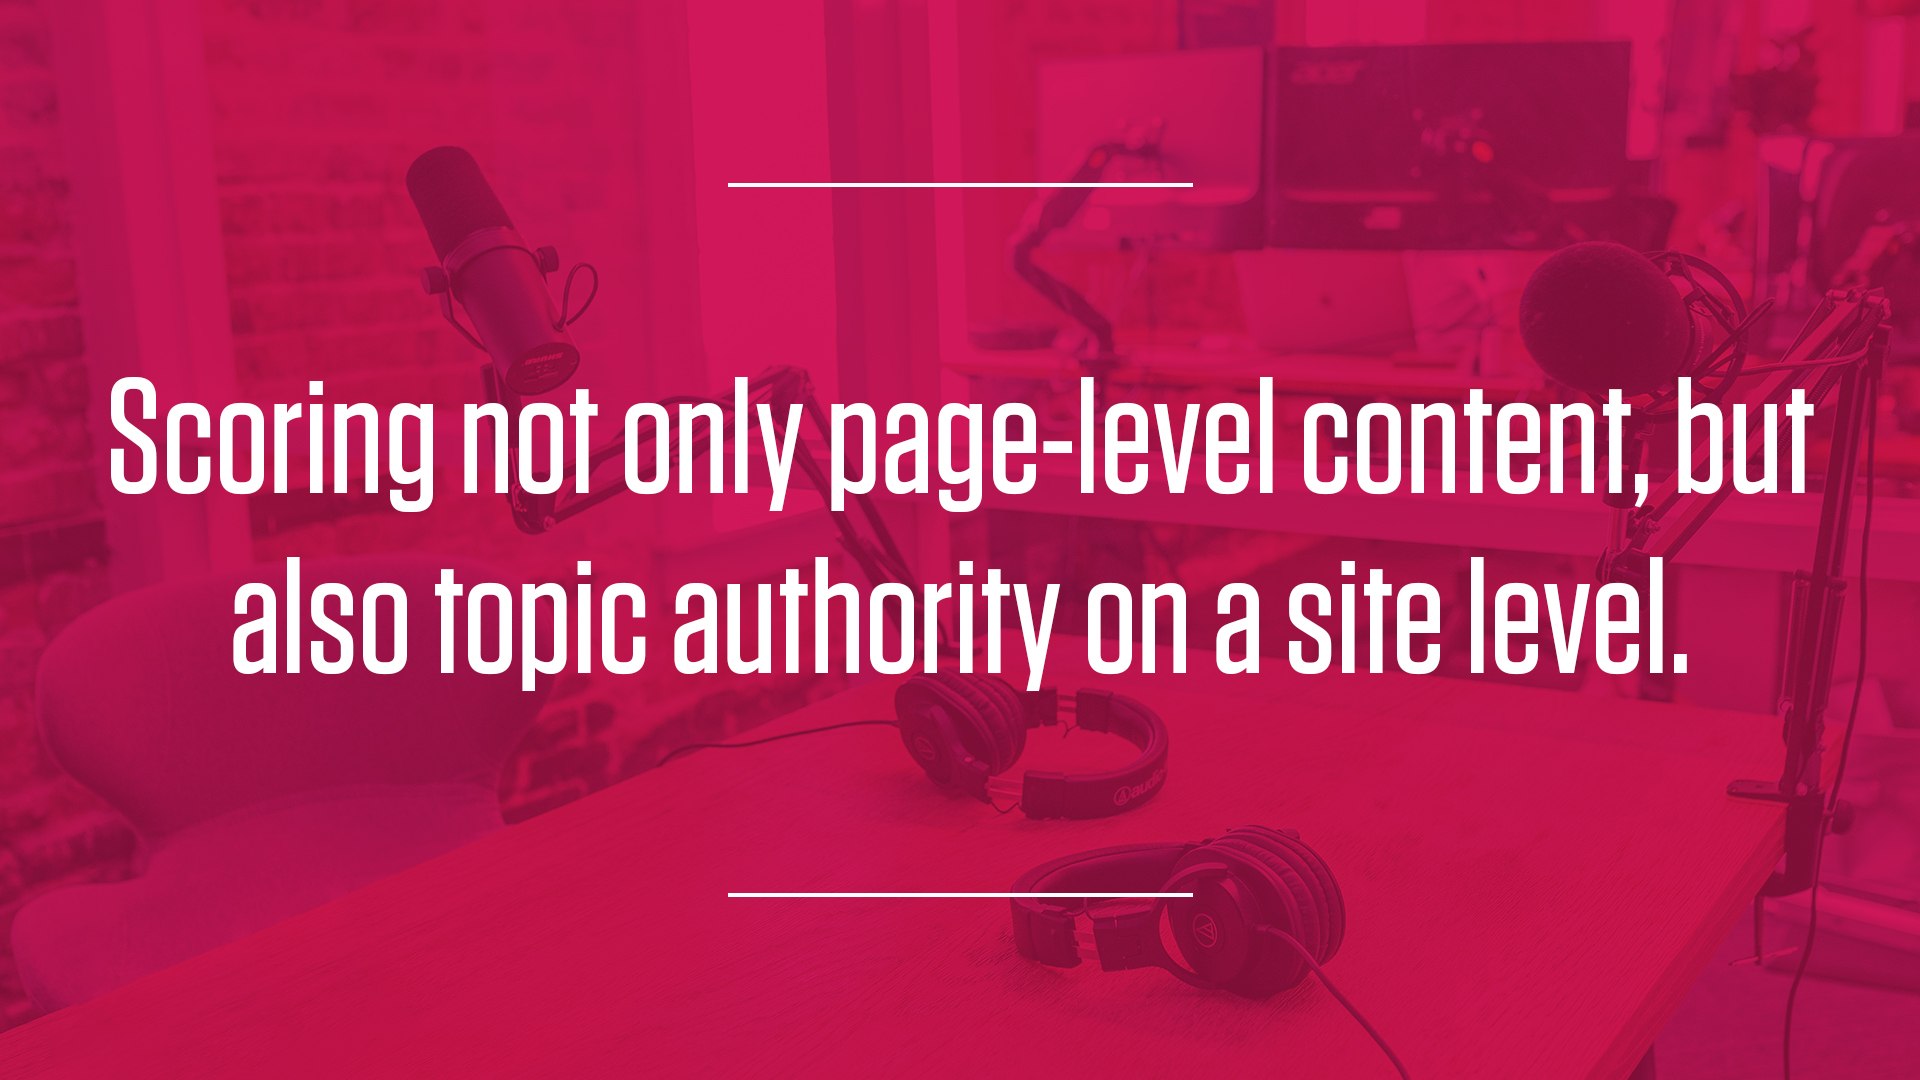 Page-Level Scoring and Topic Authority on a Site Level